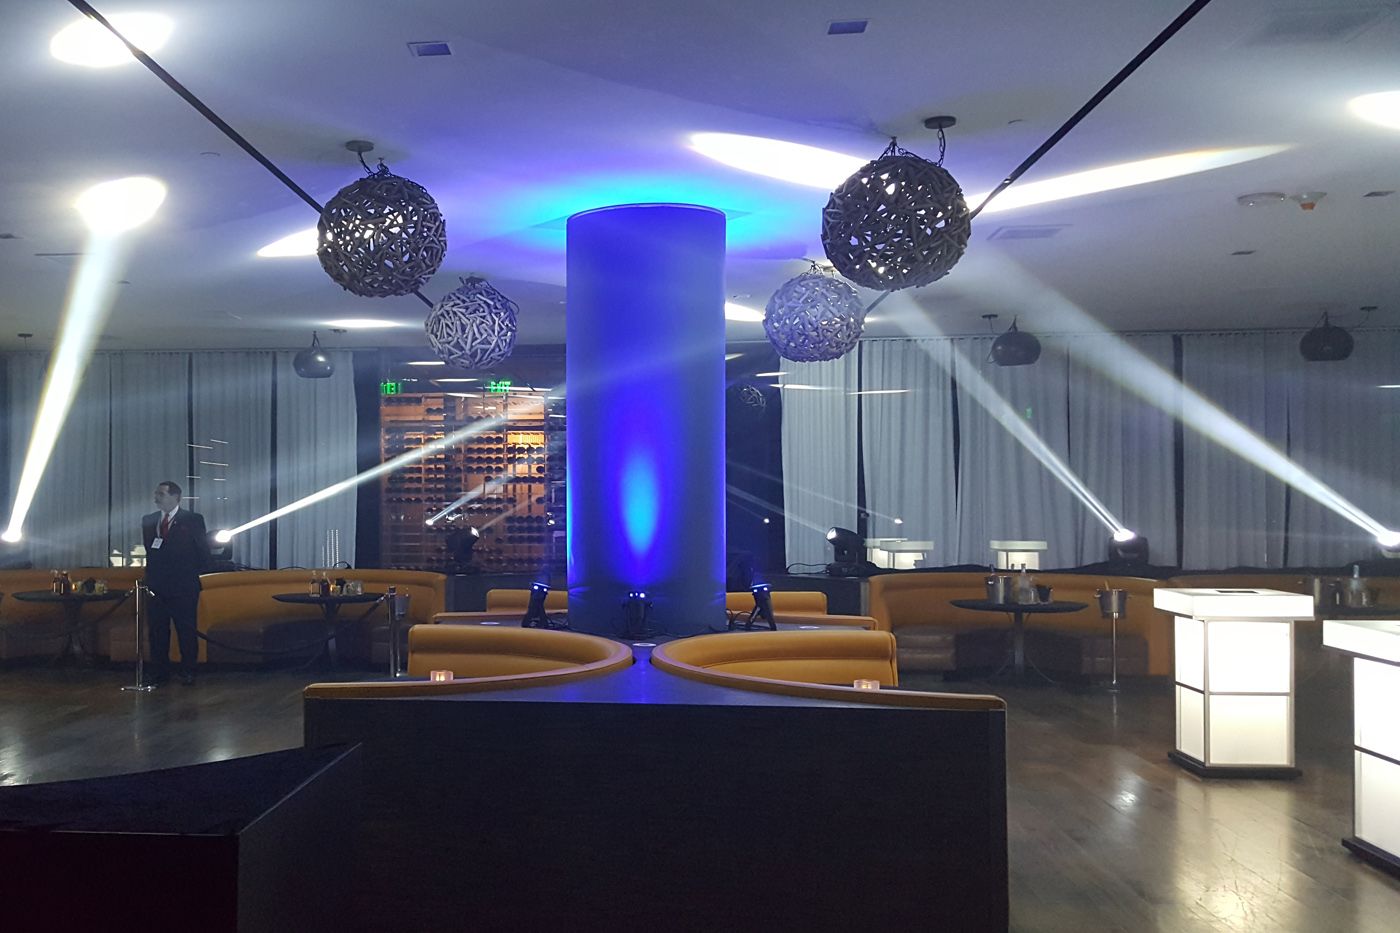 Moving lights in lounge area at event